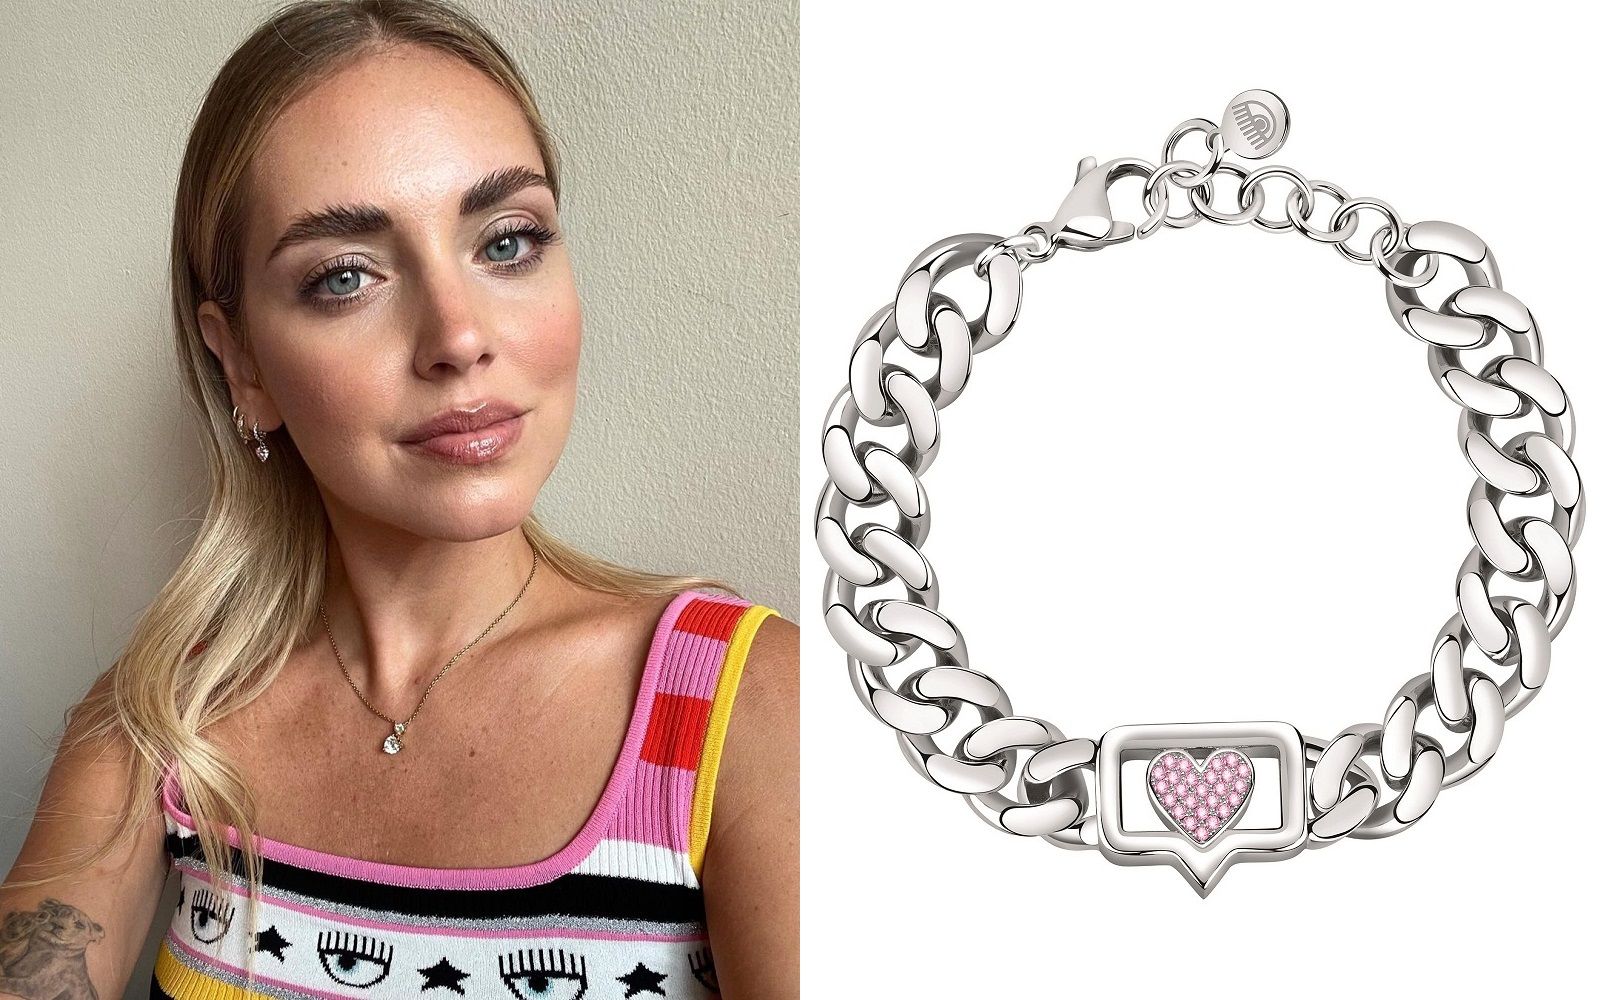 Chiara Ferragni's first jewelry collection is coming soon